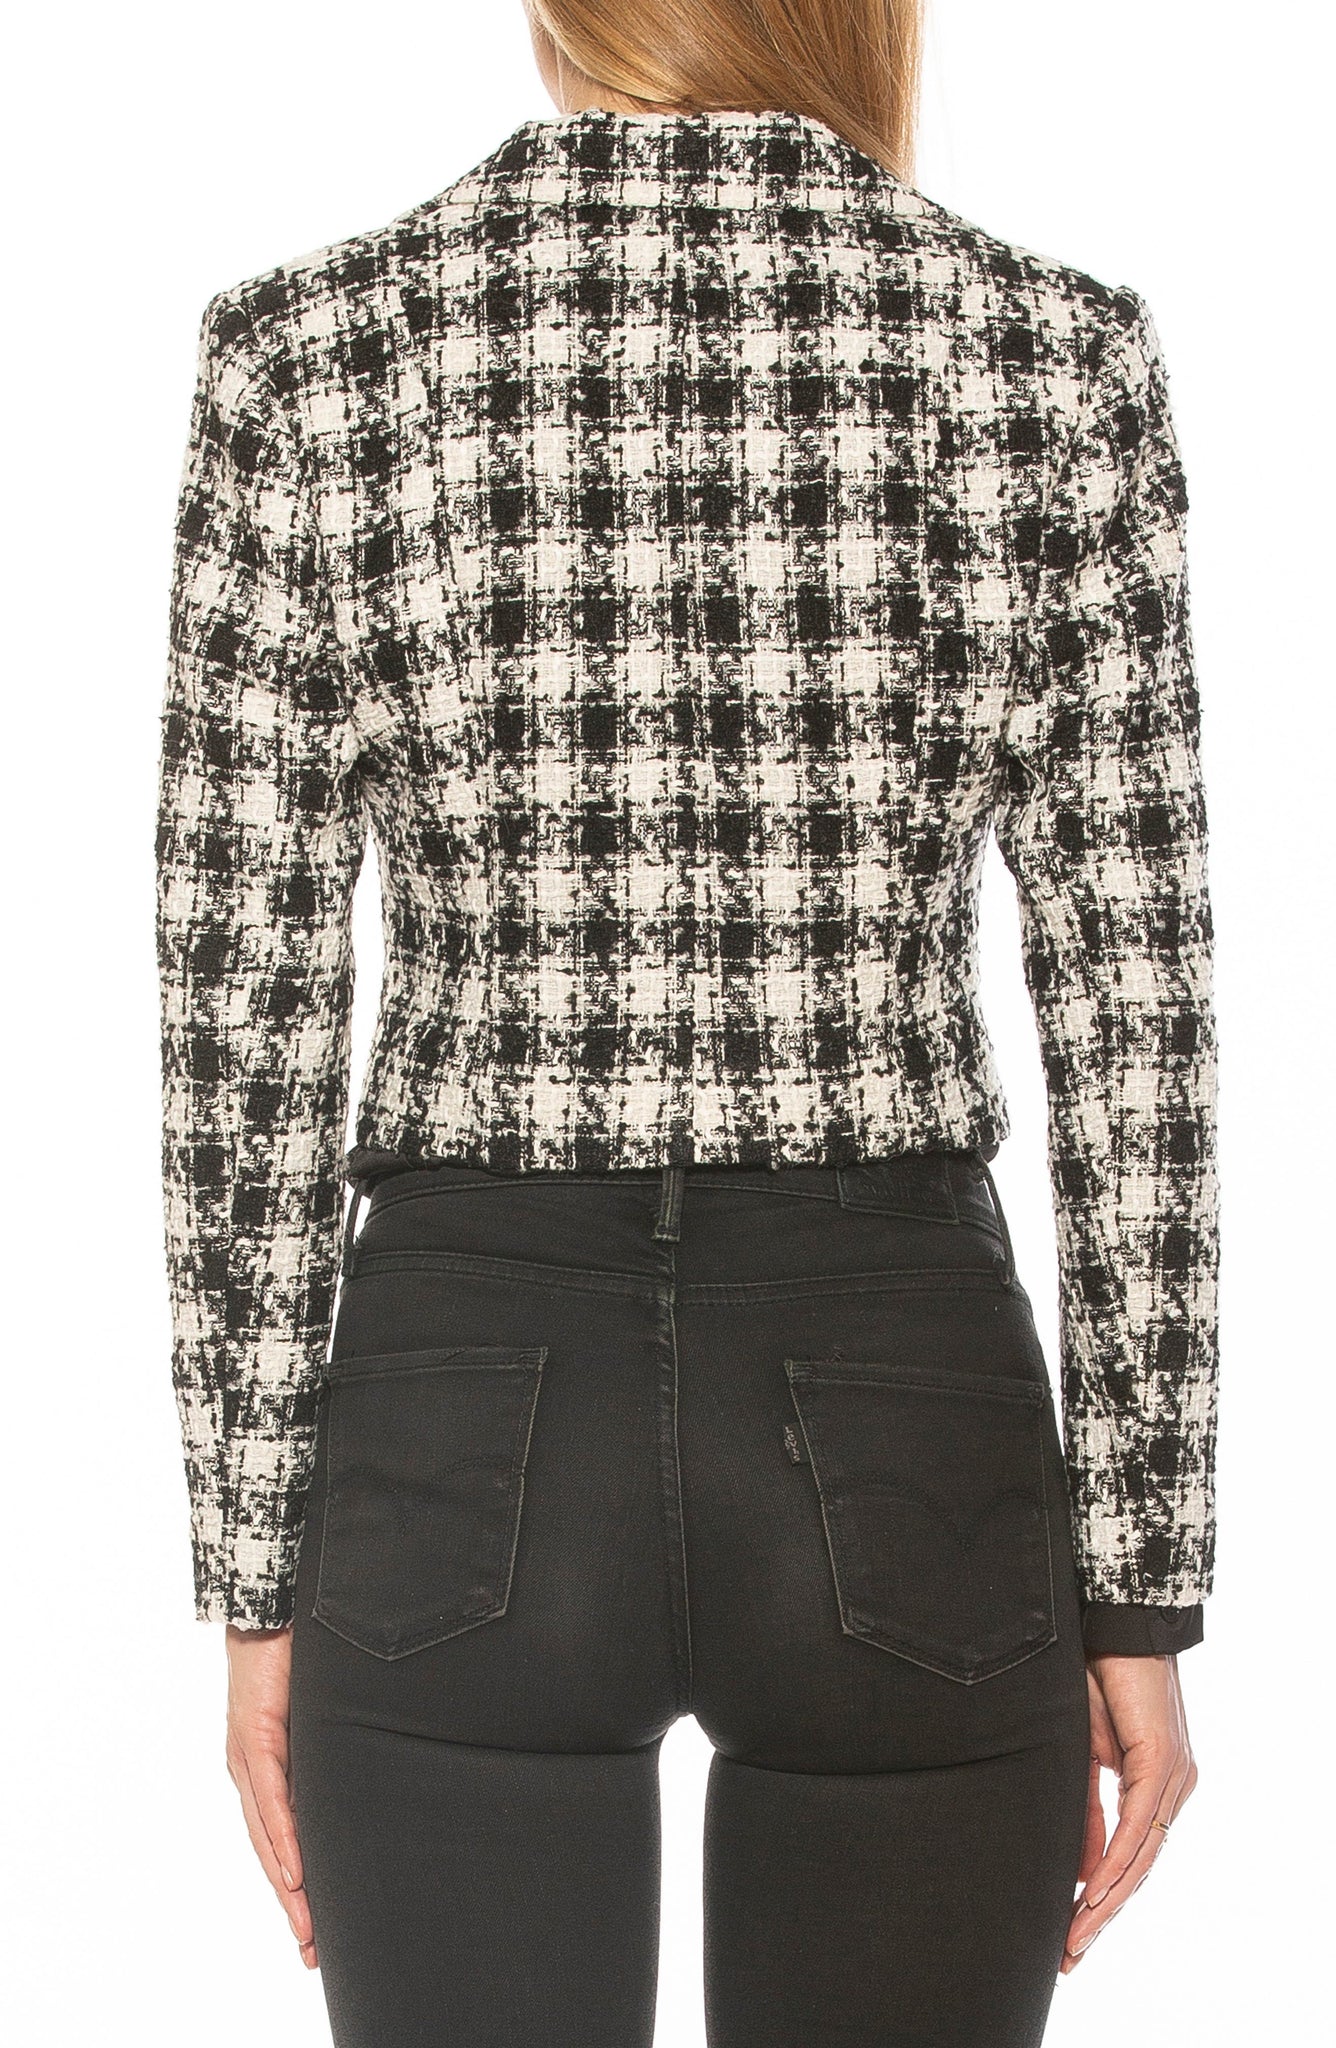 ALEXIA ADMOR Jesse Double Breasted Crop Tweed Blazer, Main, color, BW HOUNDSTOOTH